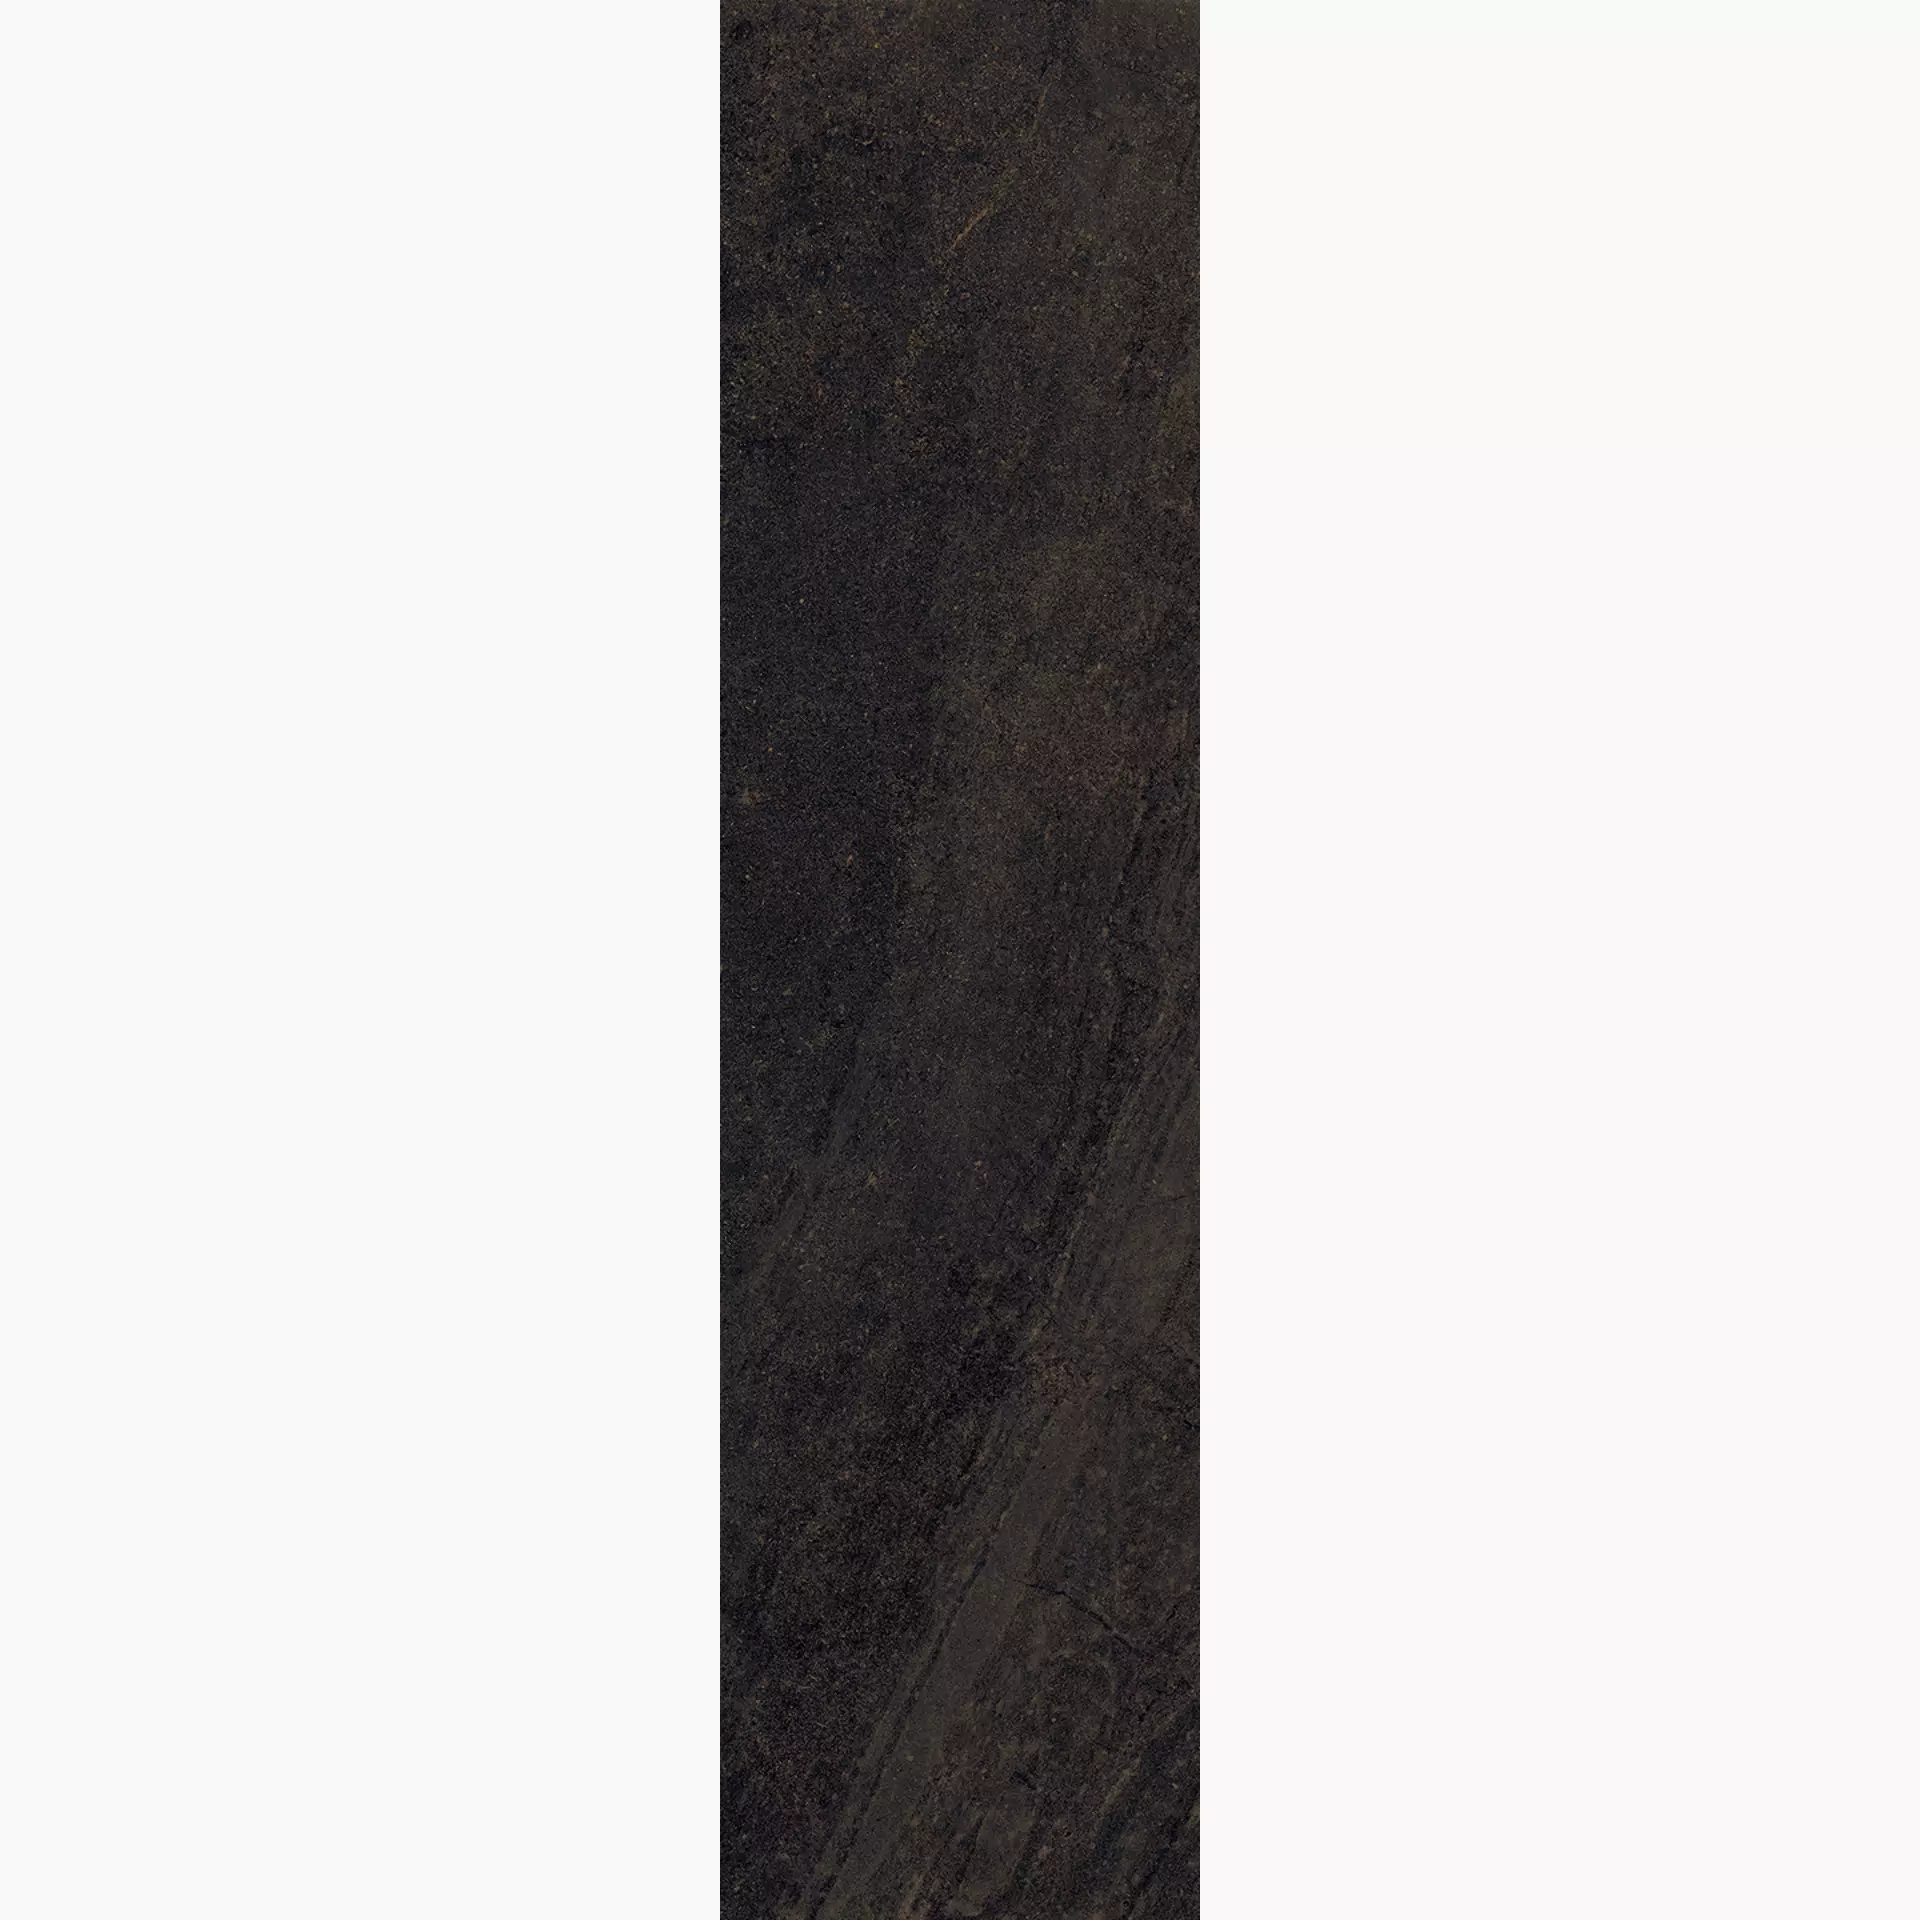 Fondovalle Planeto Pluto Natural PNT276 30x120cm rectified 8,5mm